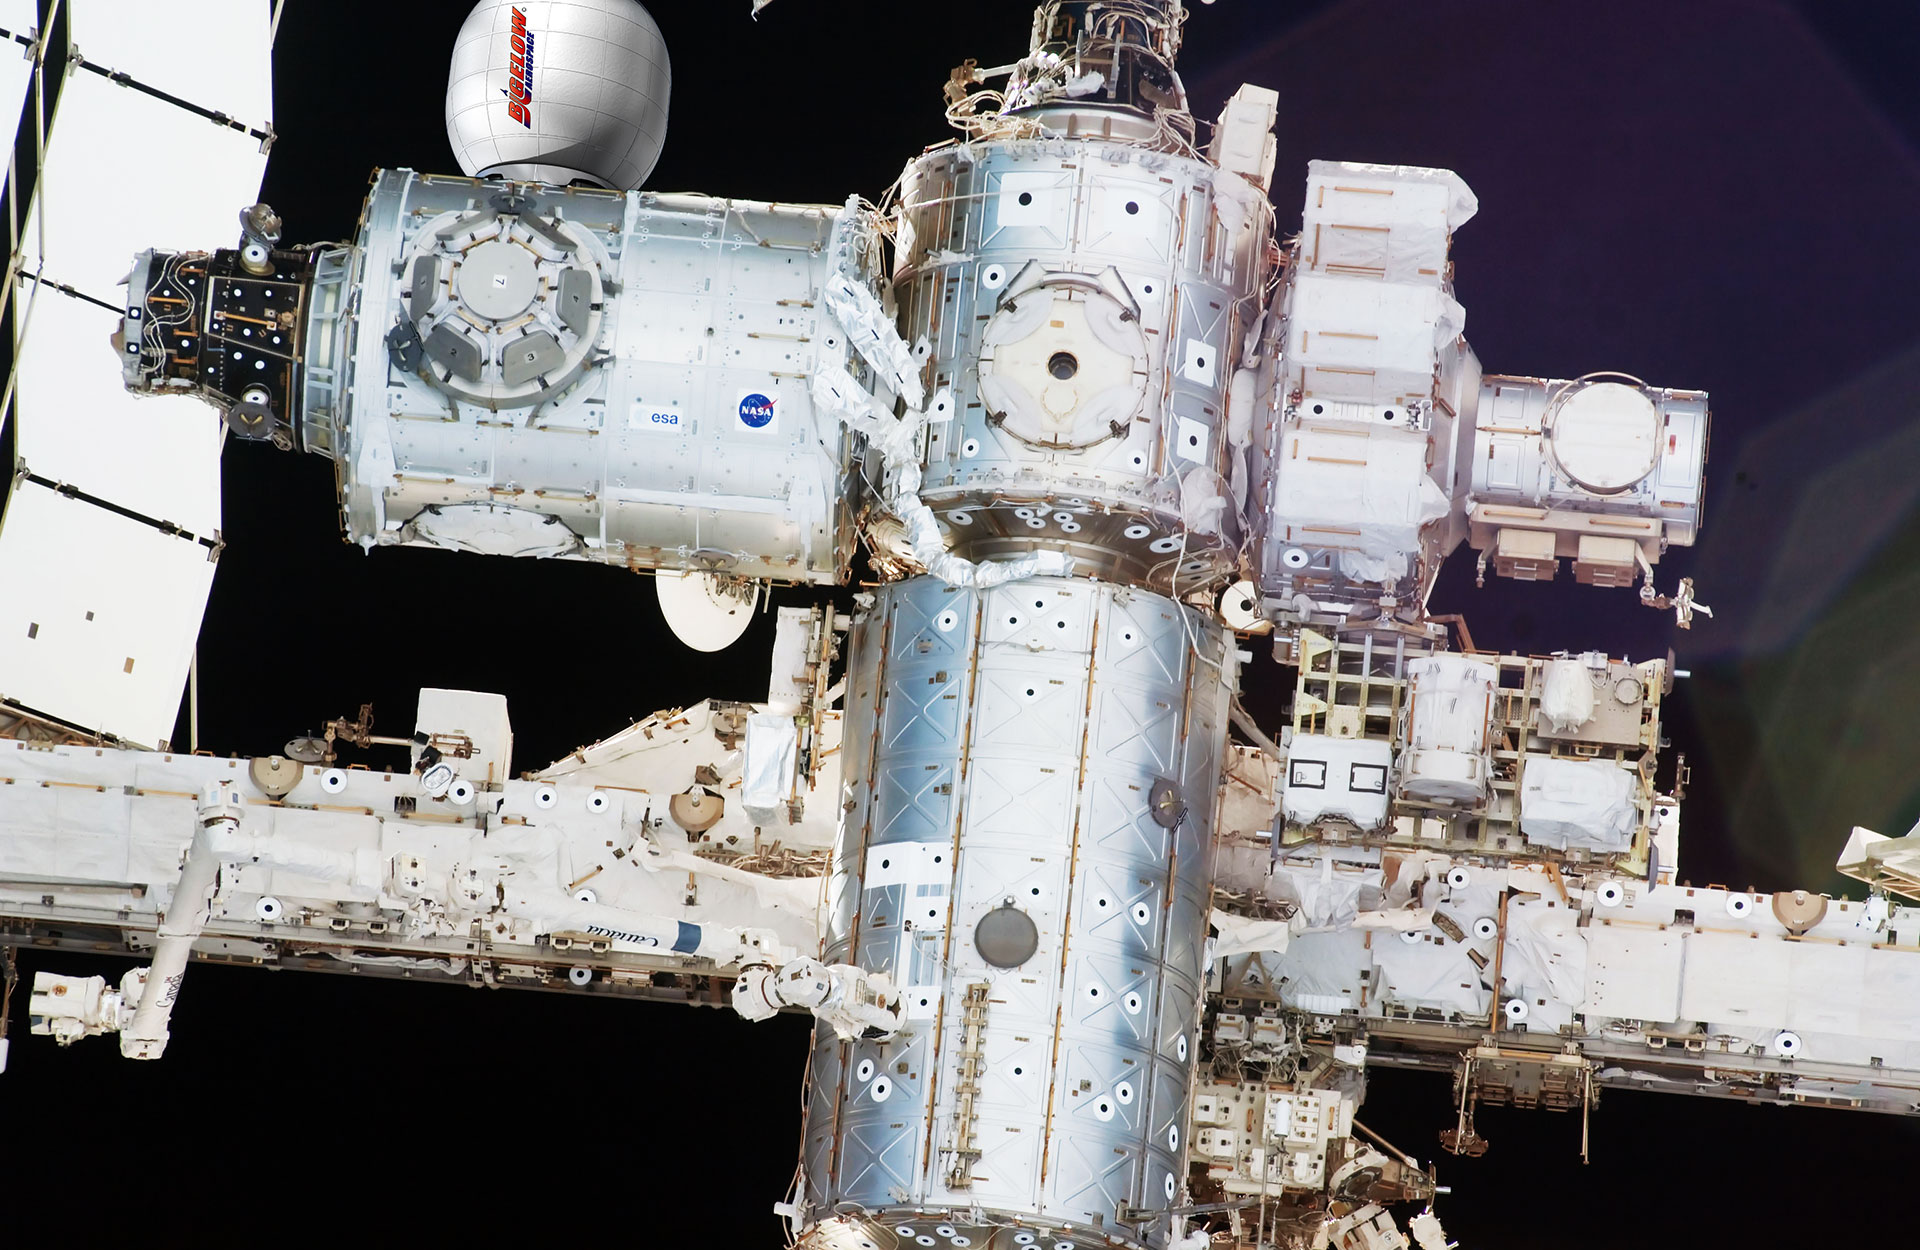 Bigelow Expandable Activity Module (BEAM) will be berthed to the Tranquility Node of the International Space Station for a two-year demonstration. It will be the first private space habitat of its kind. Credit: Bigelow Aerospace